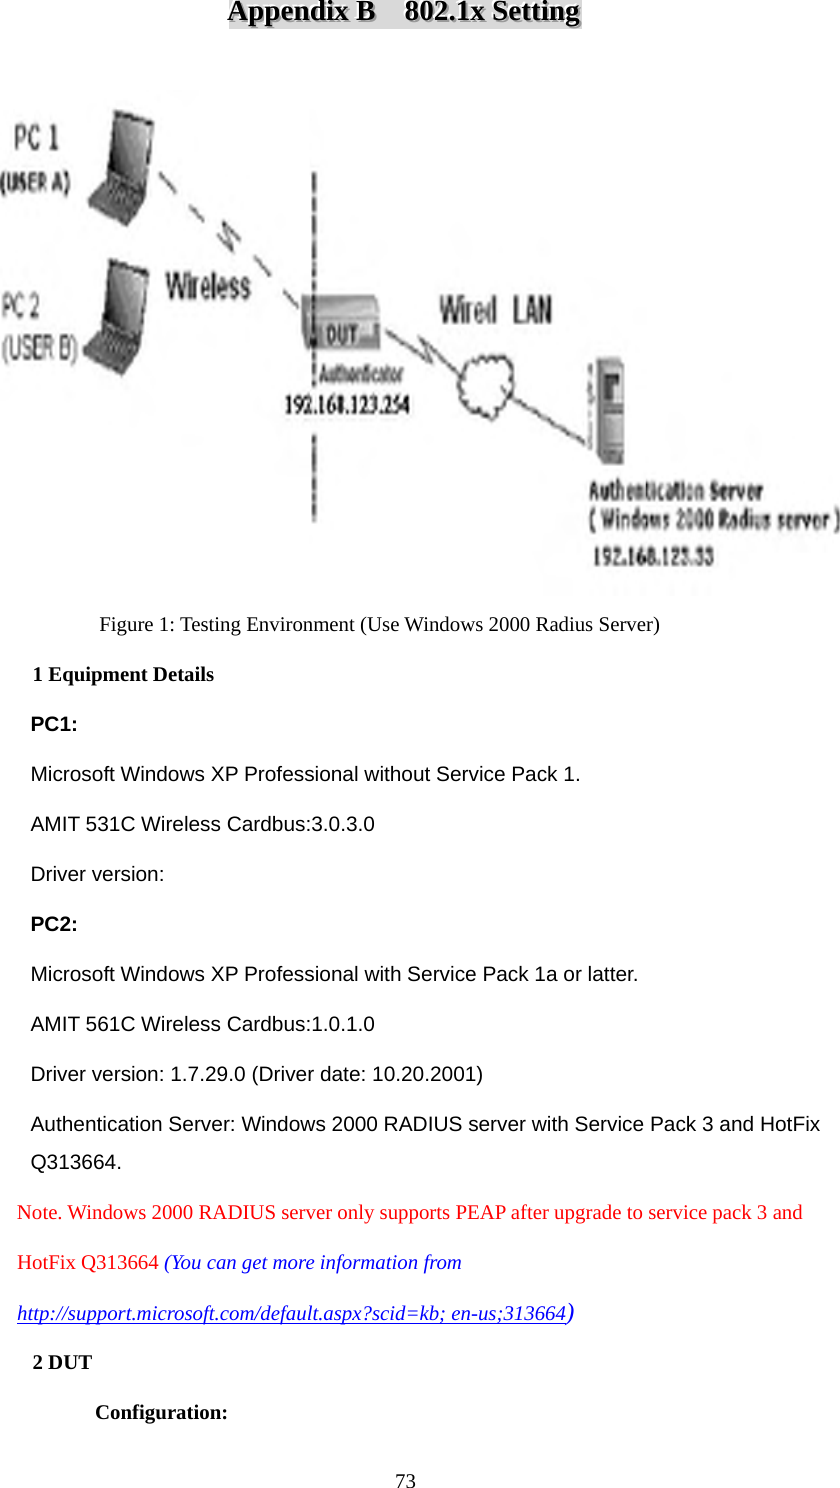 AAAppppppeeennndddiiixxx   BBB      888000222...111xxx   SSSeeettttttiiinnnggg     Figure 1: Testing Environment (Use Windows 2000 Radius Server) 1 Equipment Details PC1:  Microsoft Windows XP Professional without Service Pack 1. AMIT 531C Wireless Cardbus:3.0.3.0 Driver version:   PC2:  Microsoft Windows XP Professional with Service Pack 1a or latter. AMIT 561C Wireless Cardbus:1.0.1.0 Driver version: 1.7.29.0 (Driver date: 10.20.2001) Authentication Server: Windows 2000 RADIUS server with Service Pack 3 and HotFix Q313664.     Note. Windows 2000 RADIUS server only supports PEAP after upgrade to service pack 3 and         HotFix Q313664 (You can get more information from         http://support.microsoft.com/default.aspx?scid=kb; en-us;313664) 2 DUT   Configuration:  73